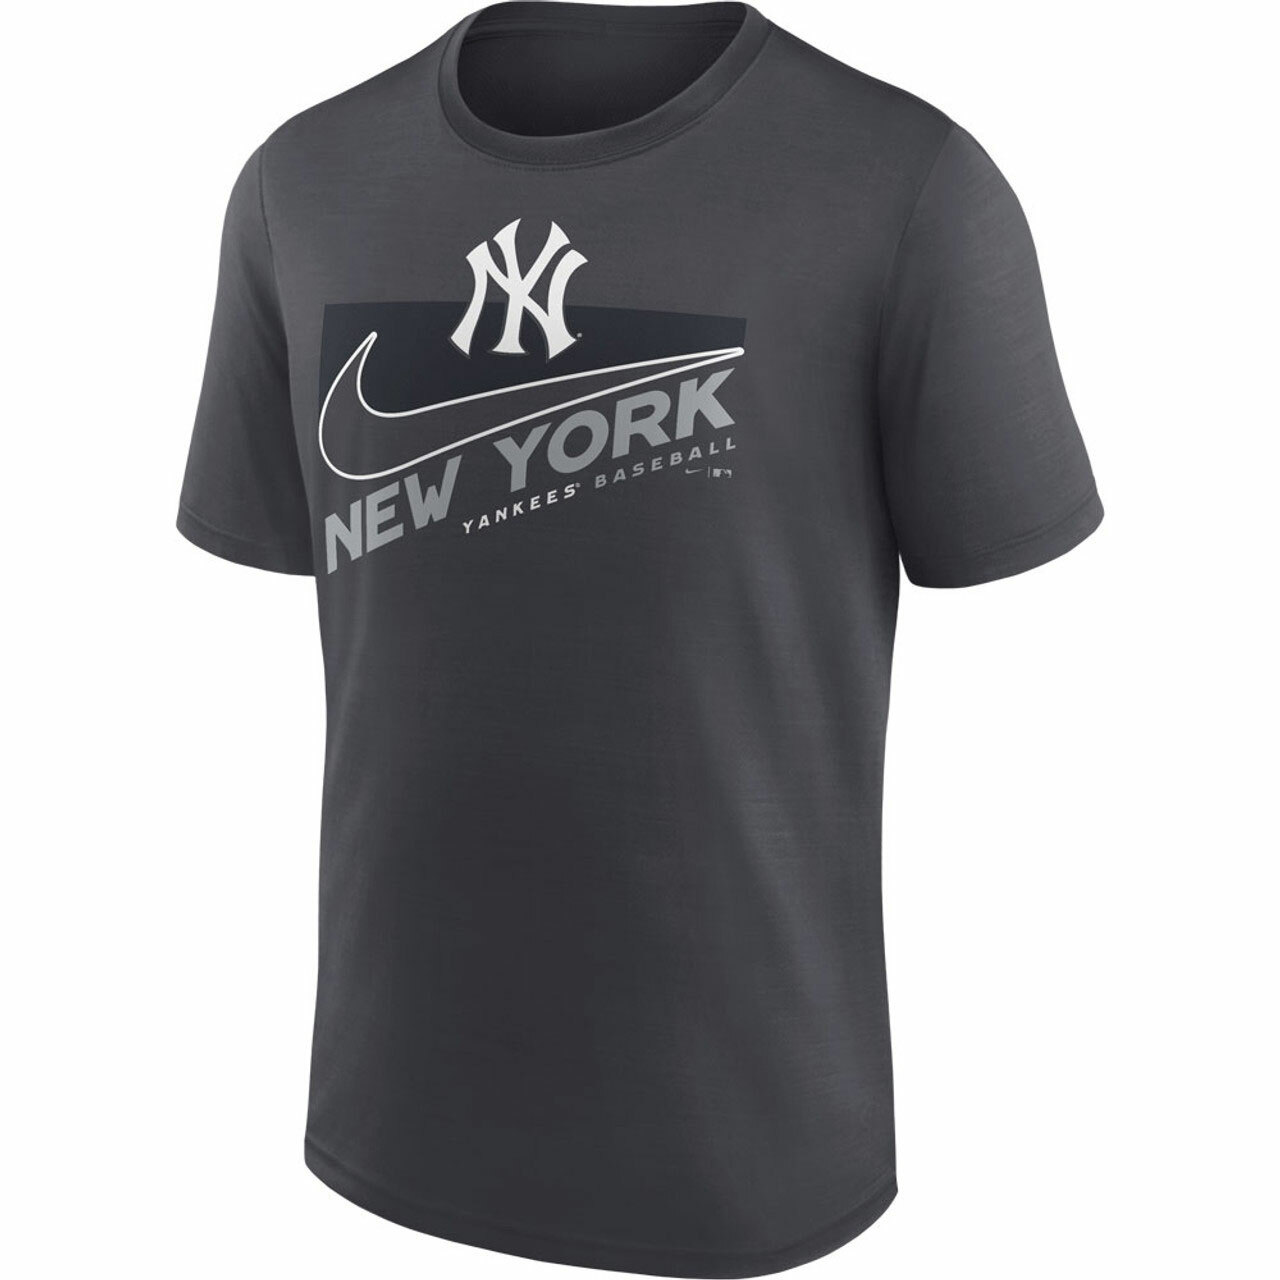 Nike Men's Navy New York Yankees Authentic Collection Flex Vent